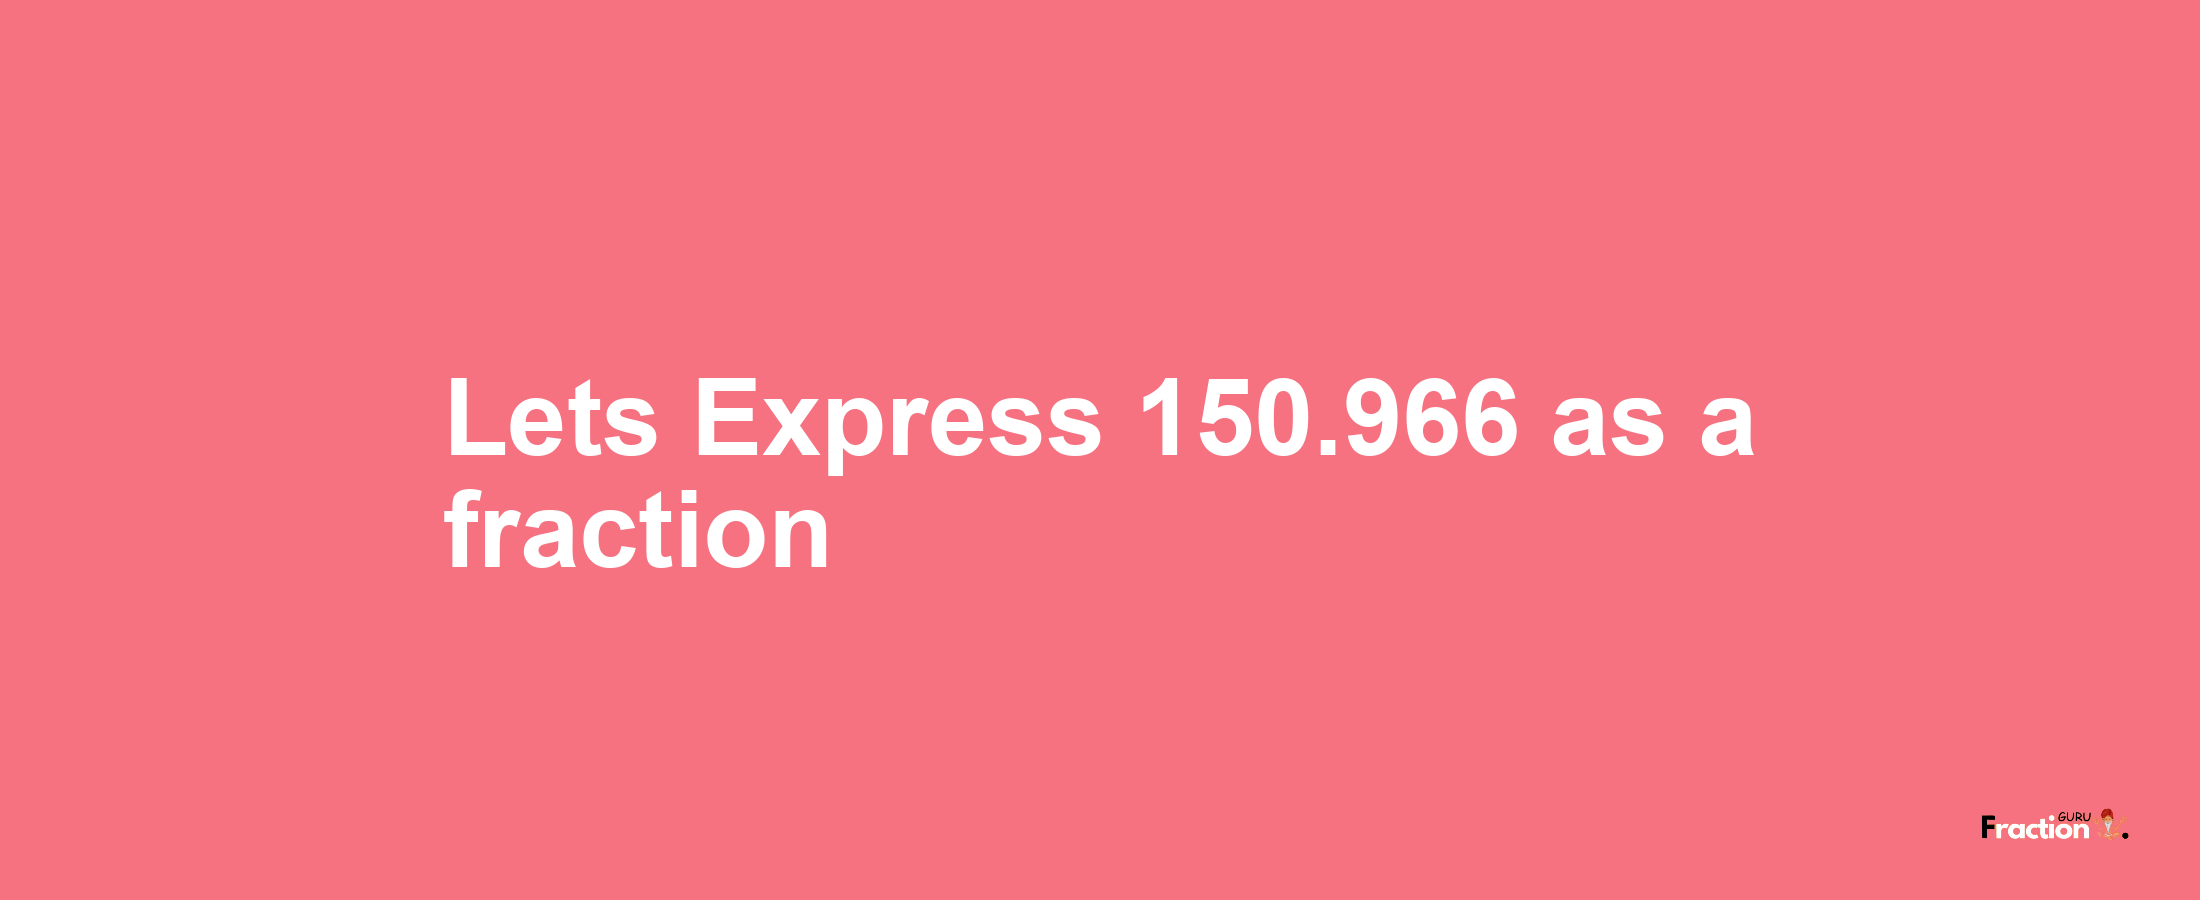 Lets Express 150.966 as afraction